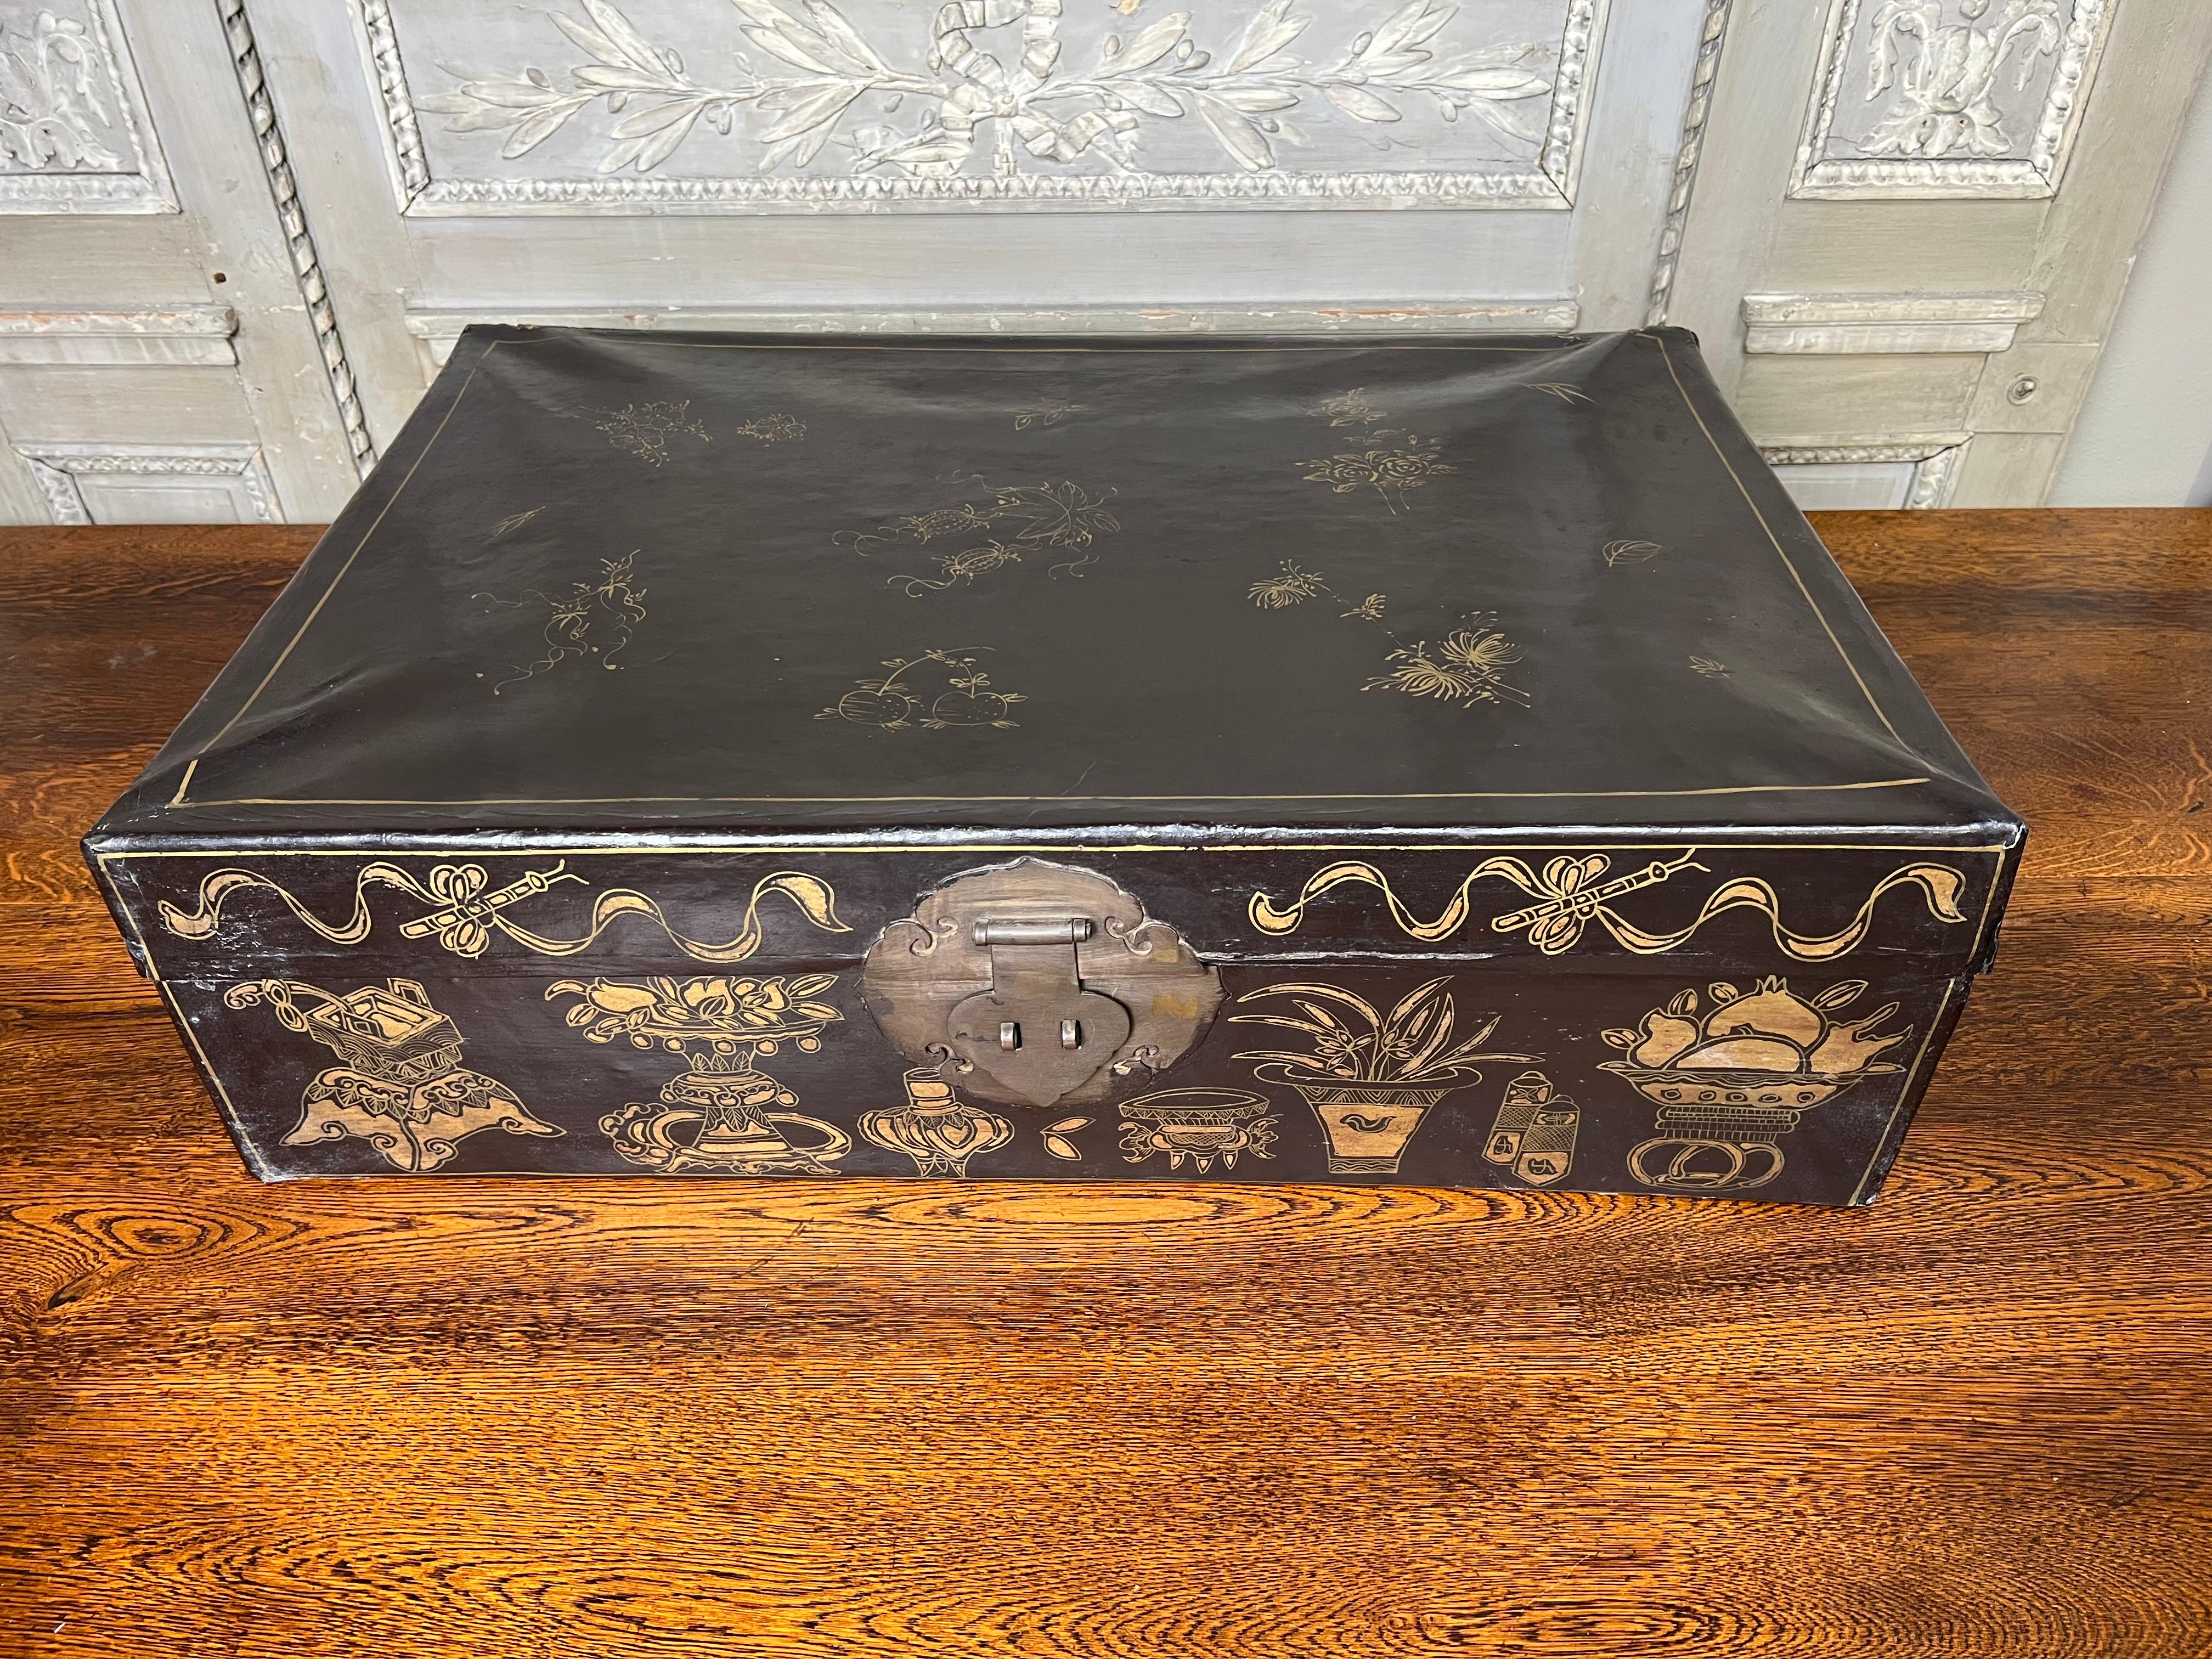 A 19th century Chinese brown and gilt leather trunk with an oxblood red lacquered interior.  This trunk is a smaller scale and is a perfect home accent being small enough to fit on a large coffee table, under a console etc.  
It it very decorative